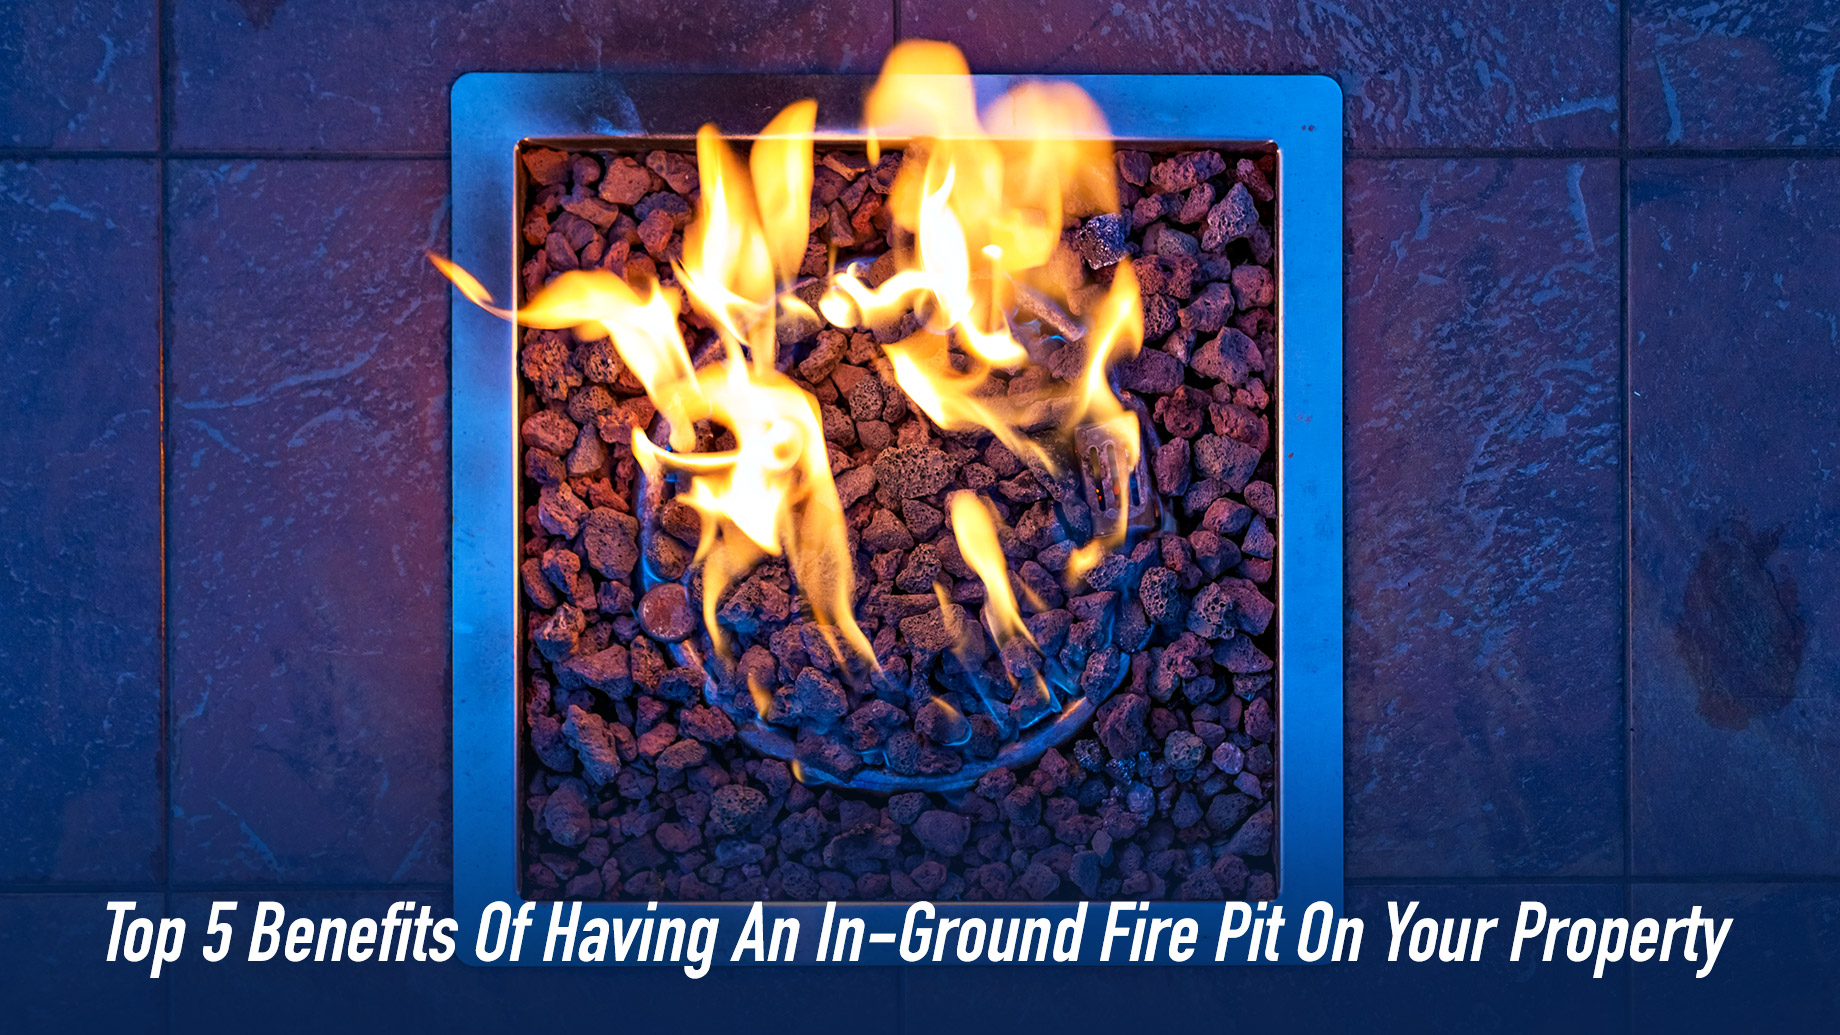 Top 5 Benefits Of Having An In-Ground Fire Pit On Your Property